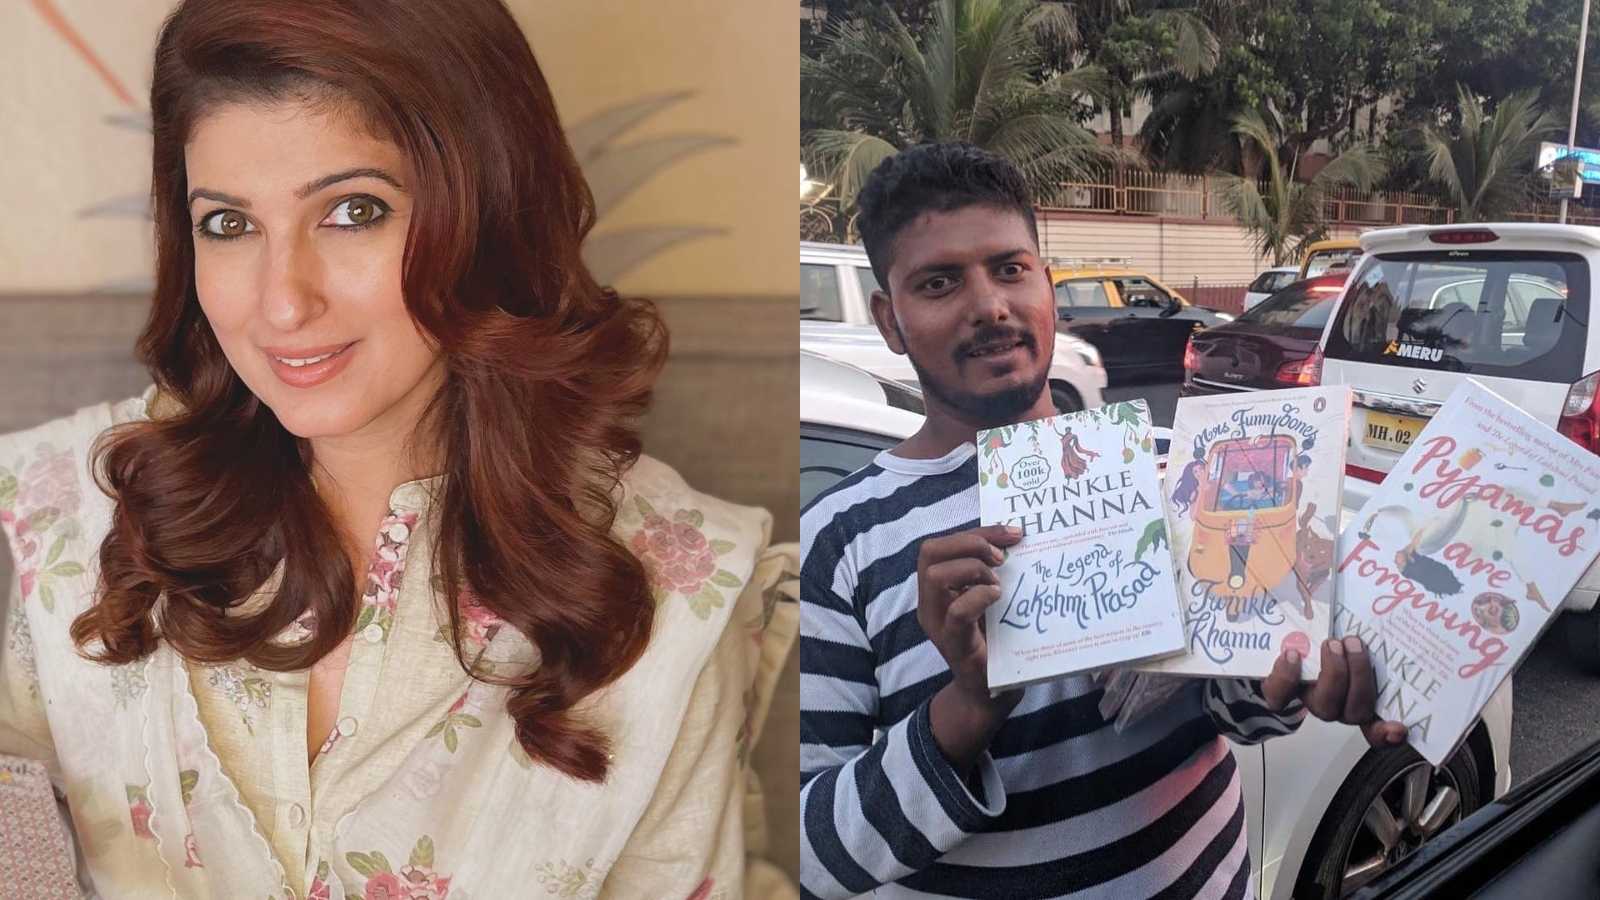 One of Twinkle Khanna's 'happiest moments' was finding pirated copies her books being sold at a traffic signal; here's why